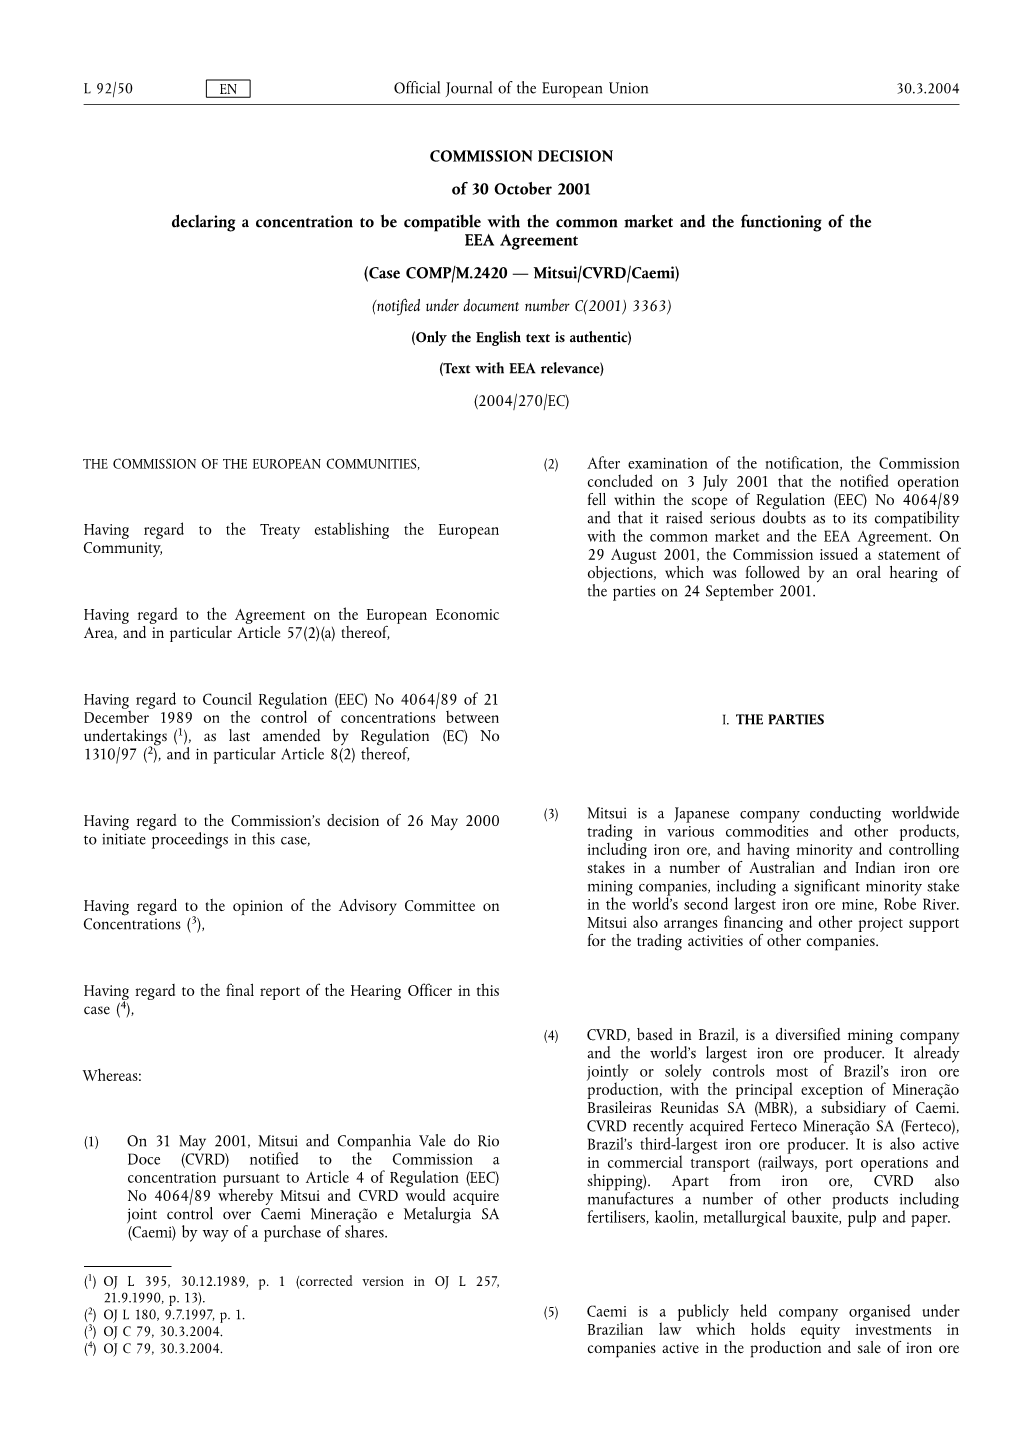 COMMISSION DECISION of 30 October 2001 Declaring A